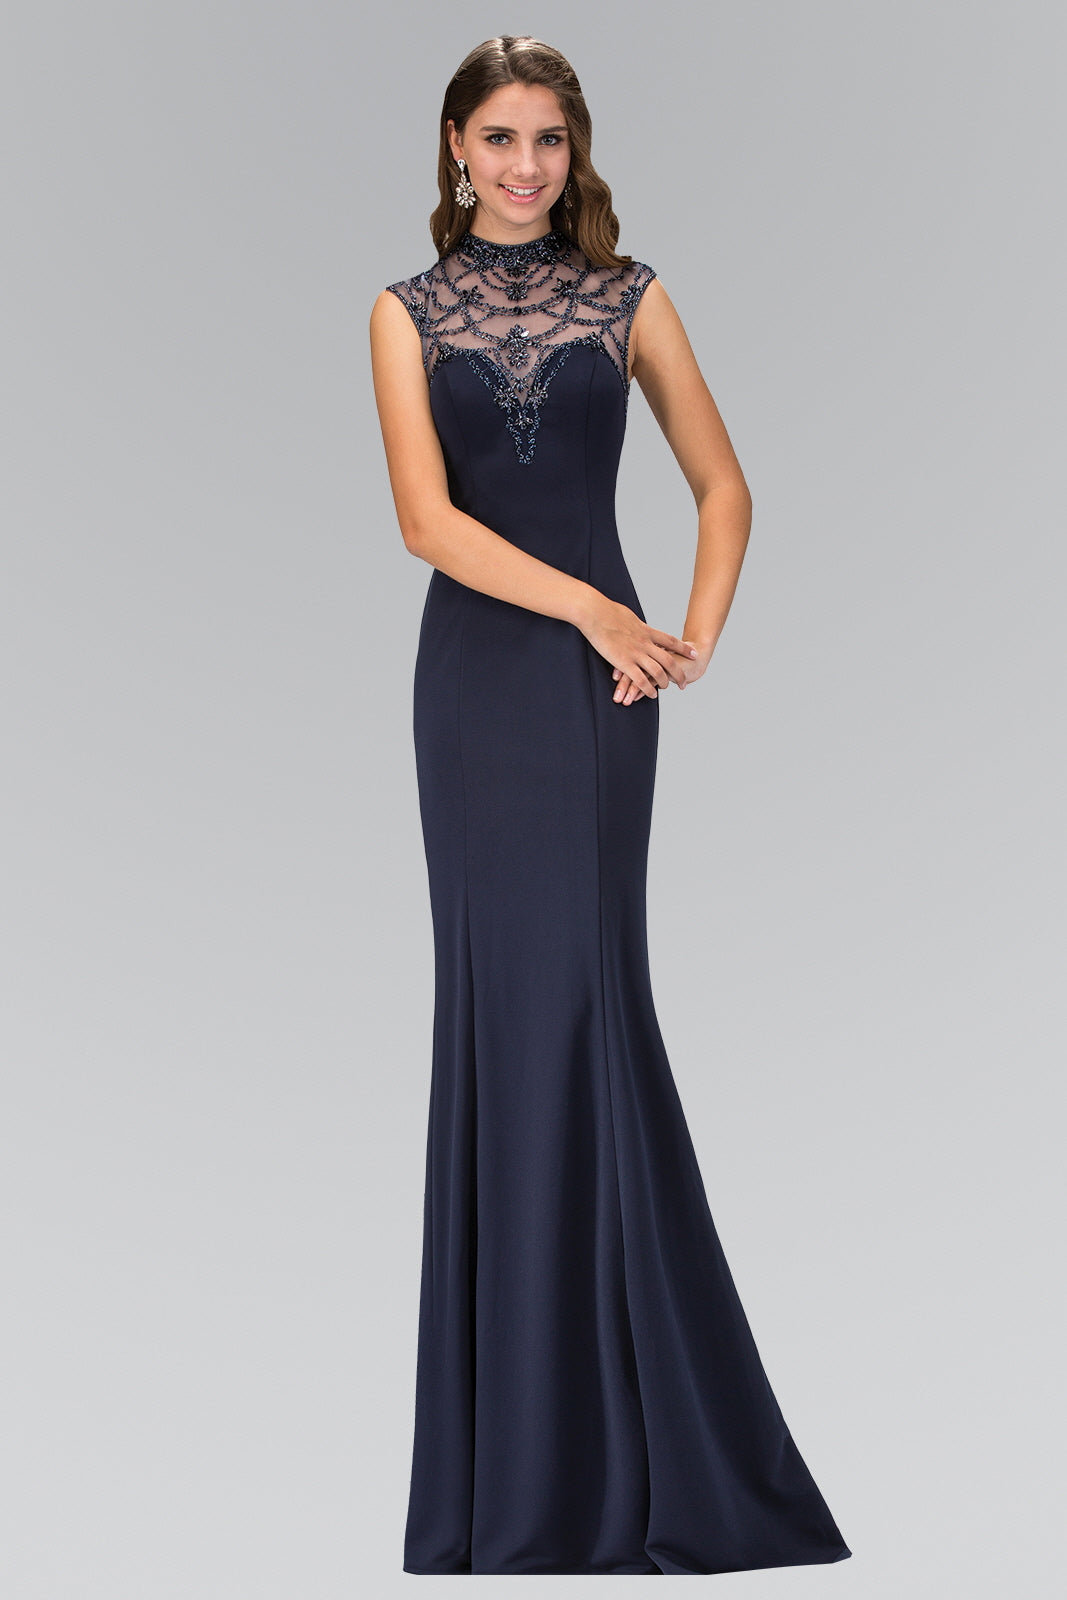 Highneck Navy Long Jersey Dress with Bead Detaiing GLGL1383 Elsy Style PROM